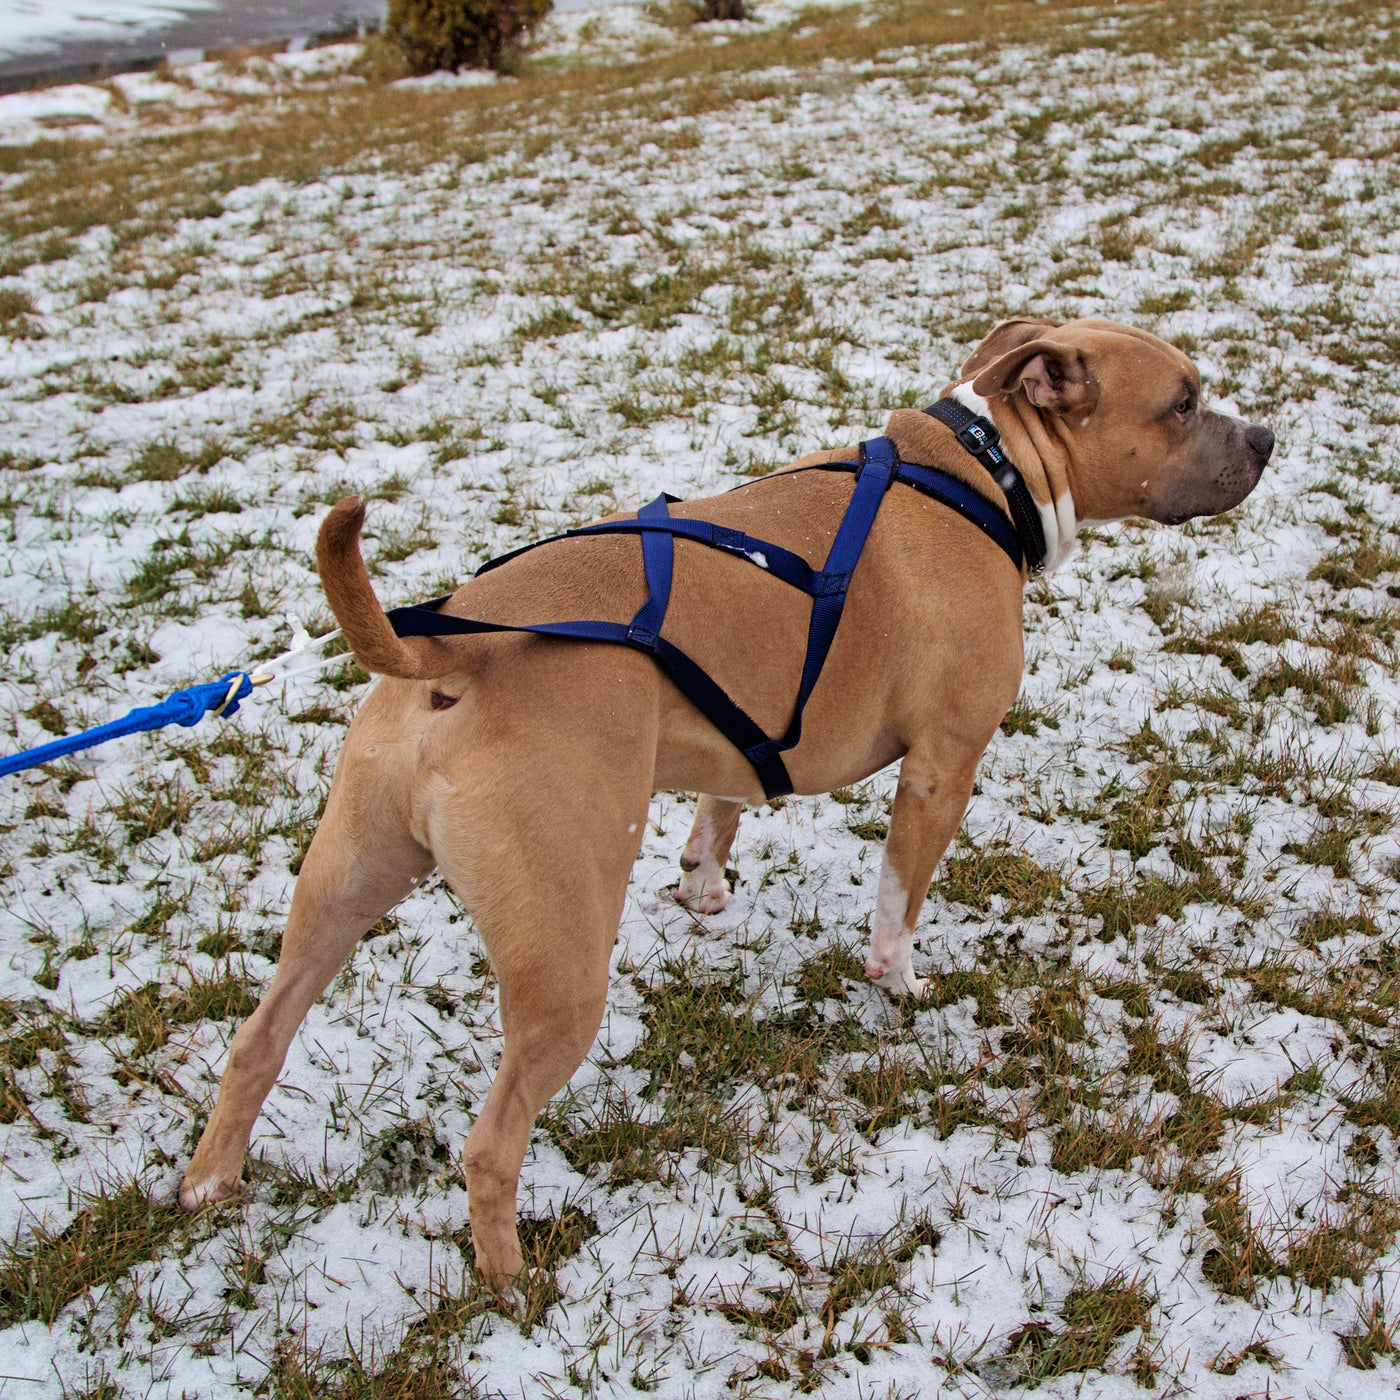 dog harness for pulling